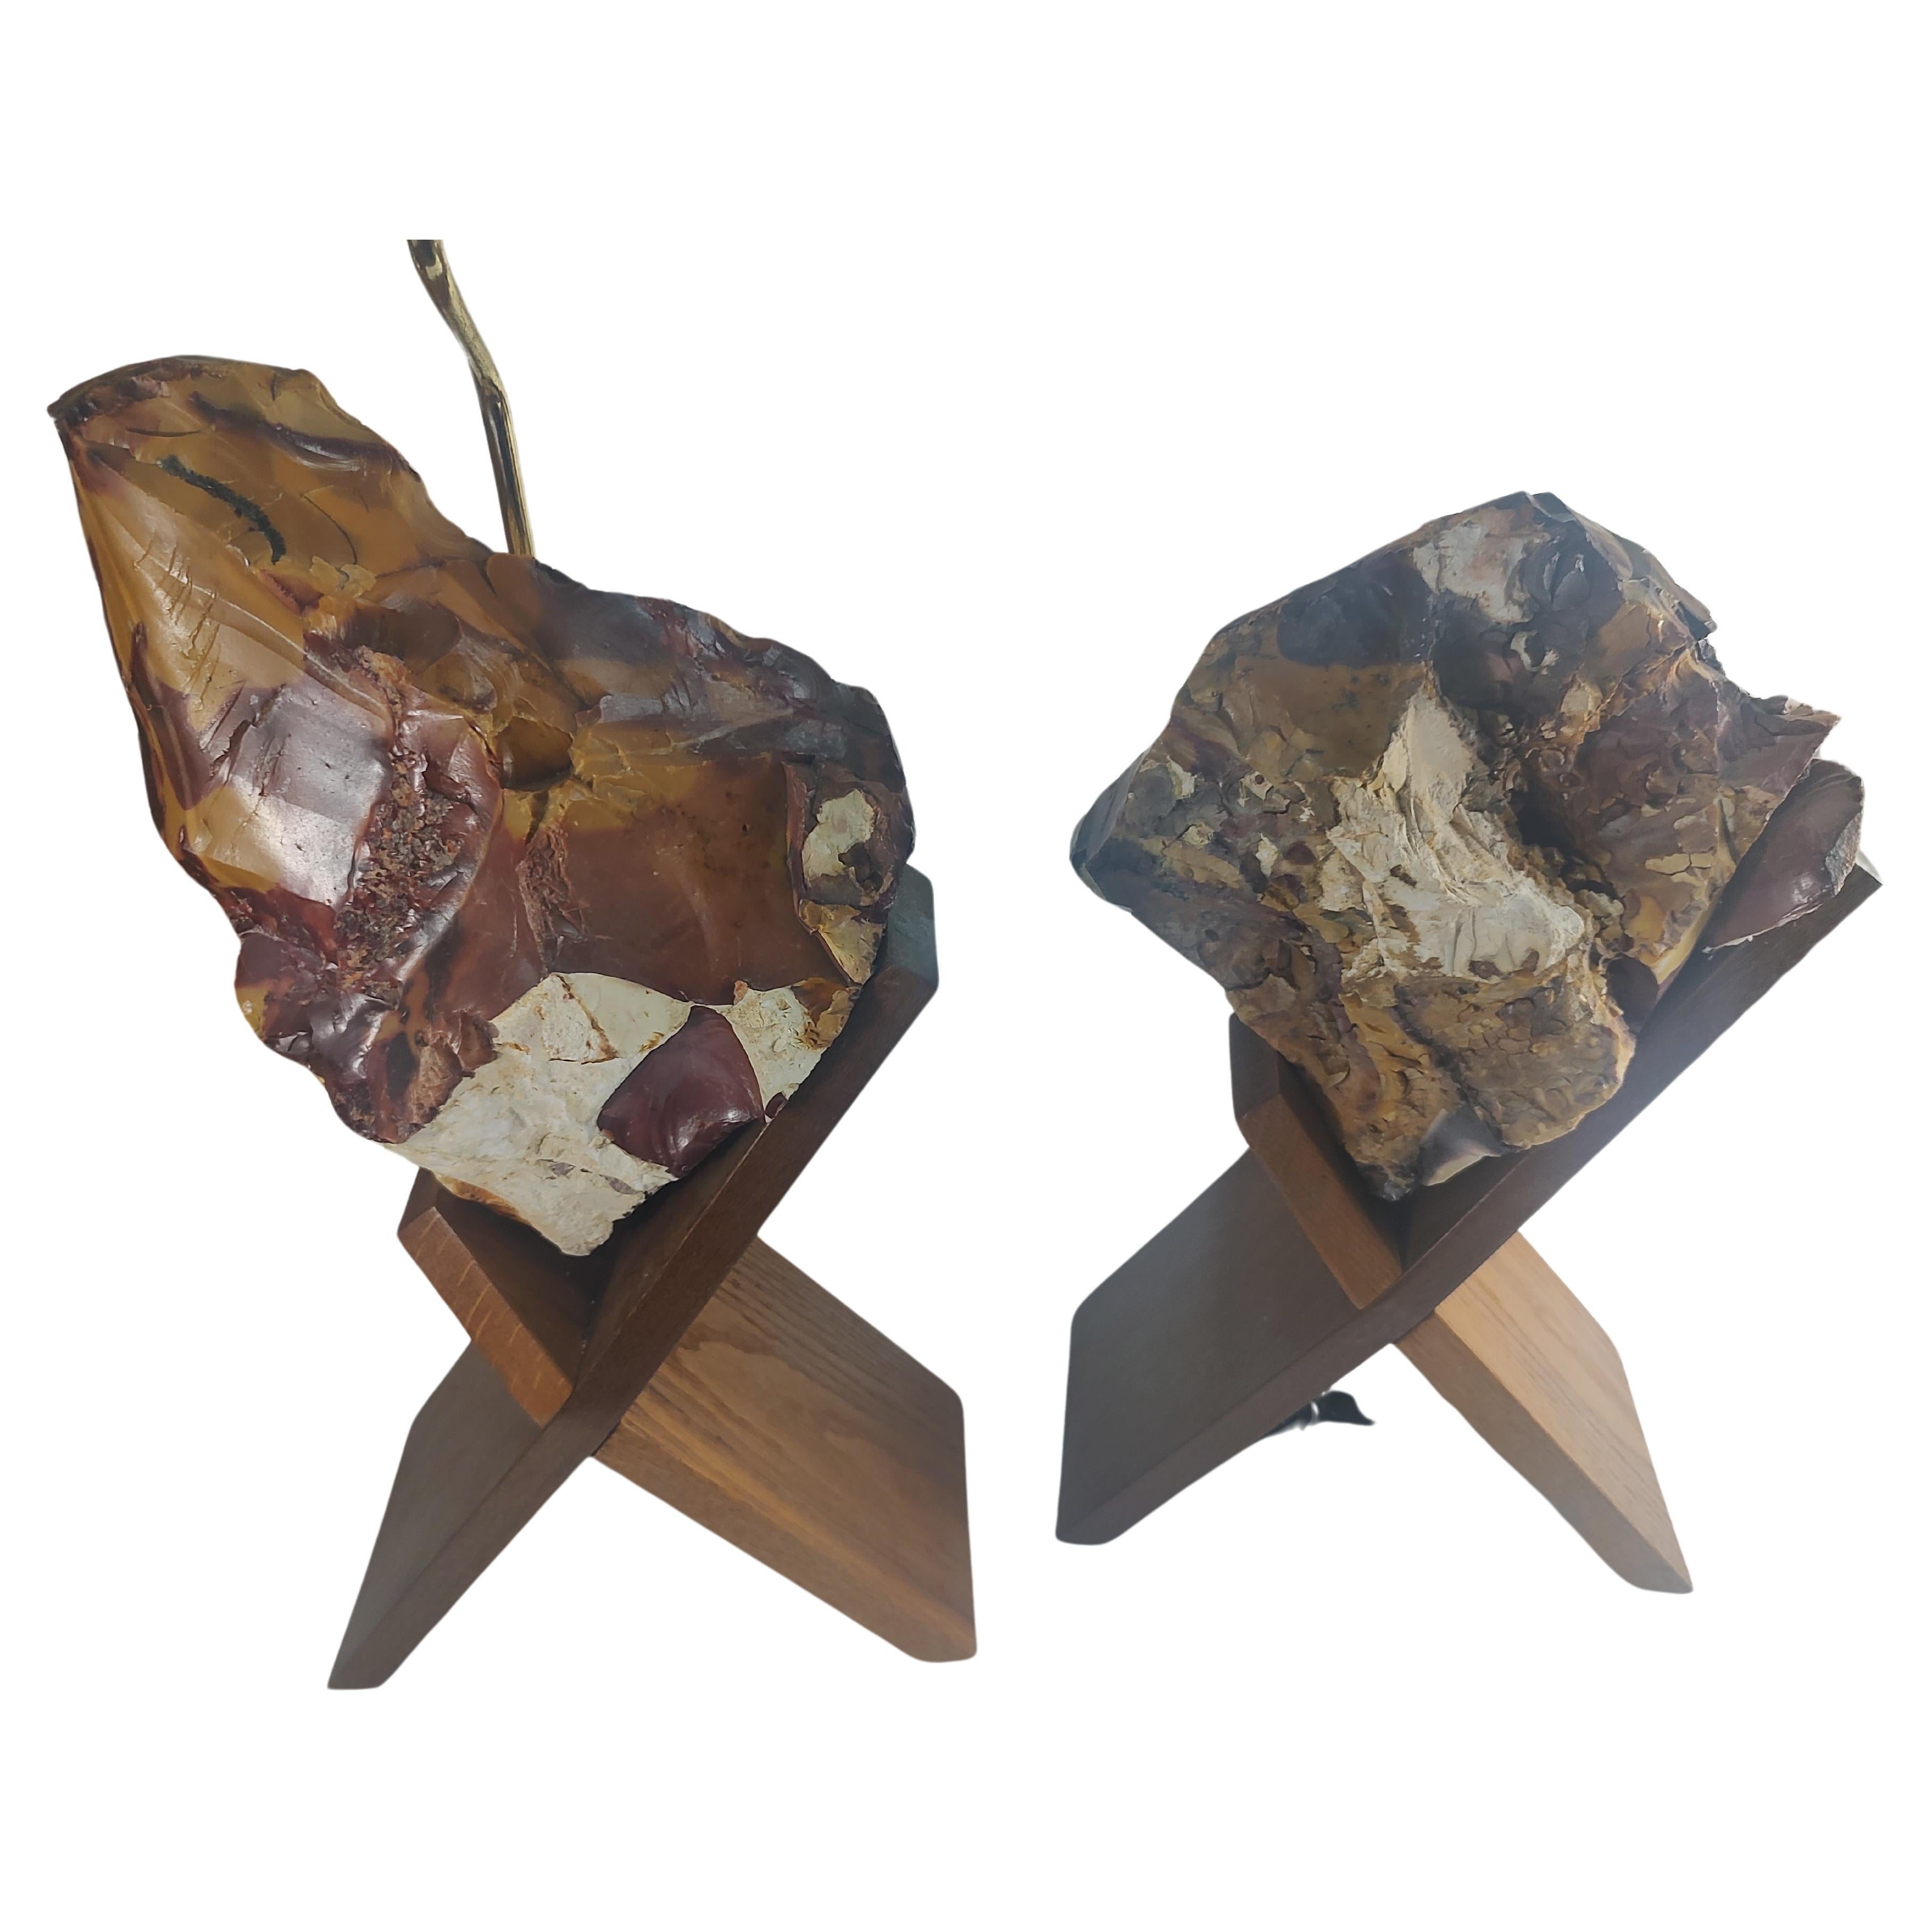 Pair of Mid Century Modern Sculptural Raw Onyx & Teak Table Lamps In Good Condition For Sale In Port Jervis, NY